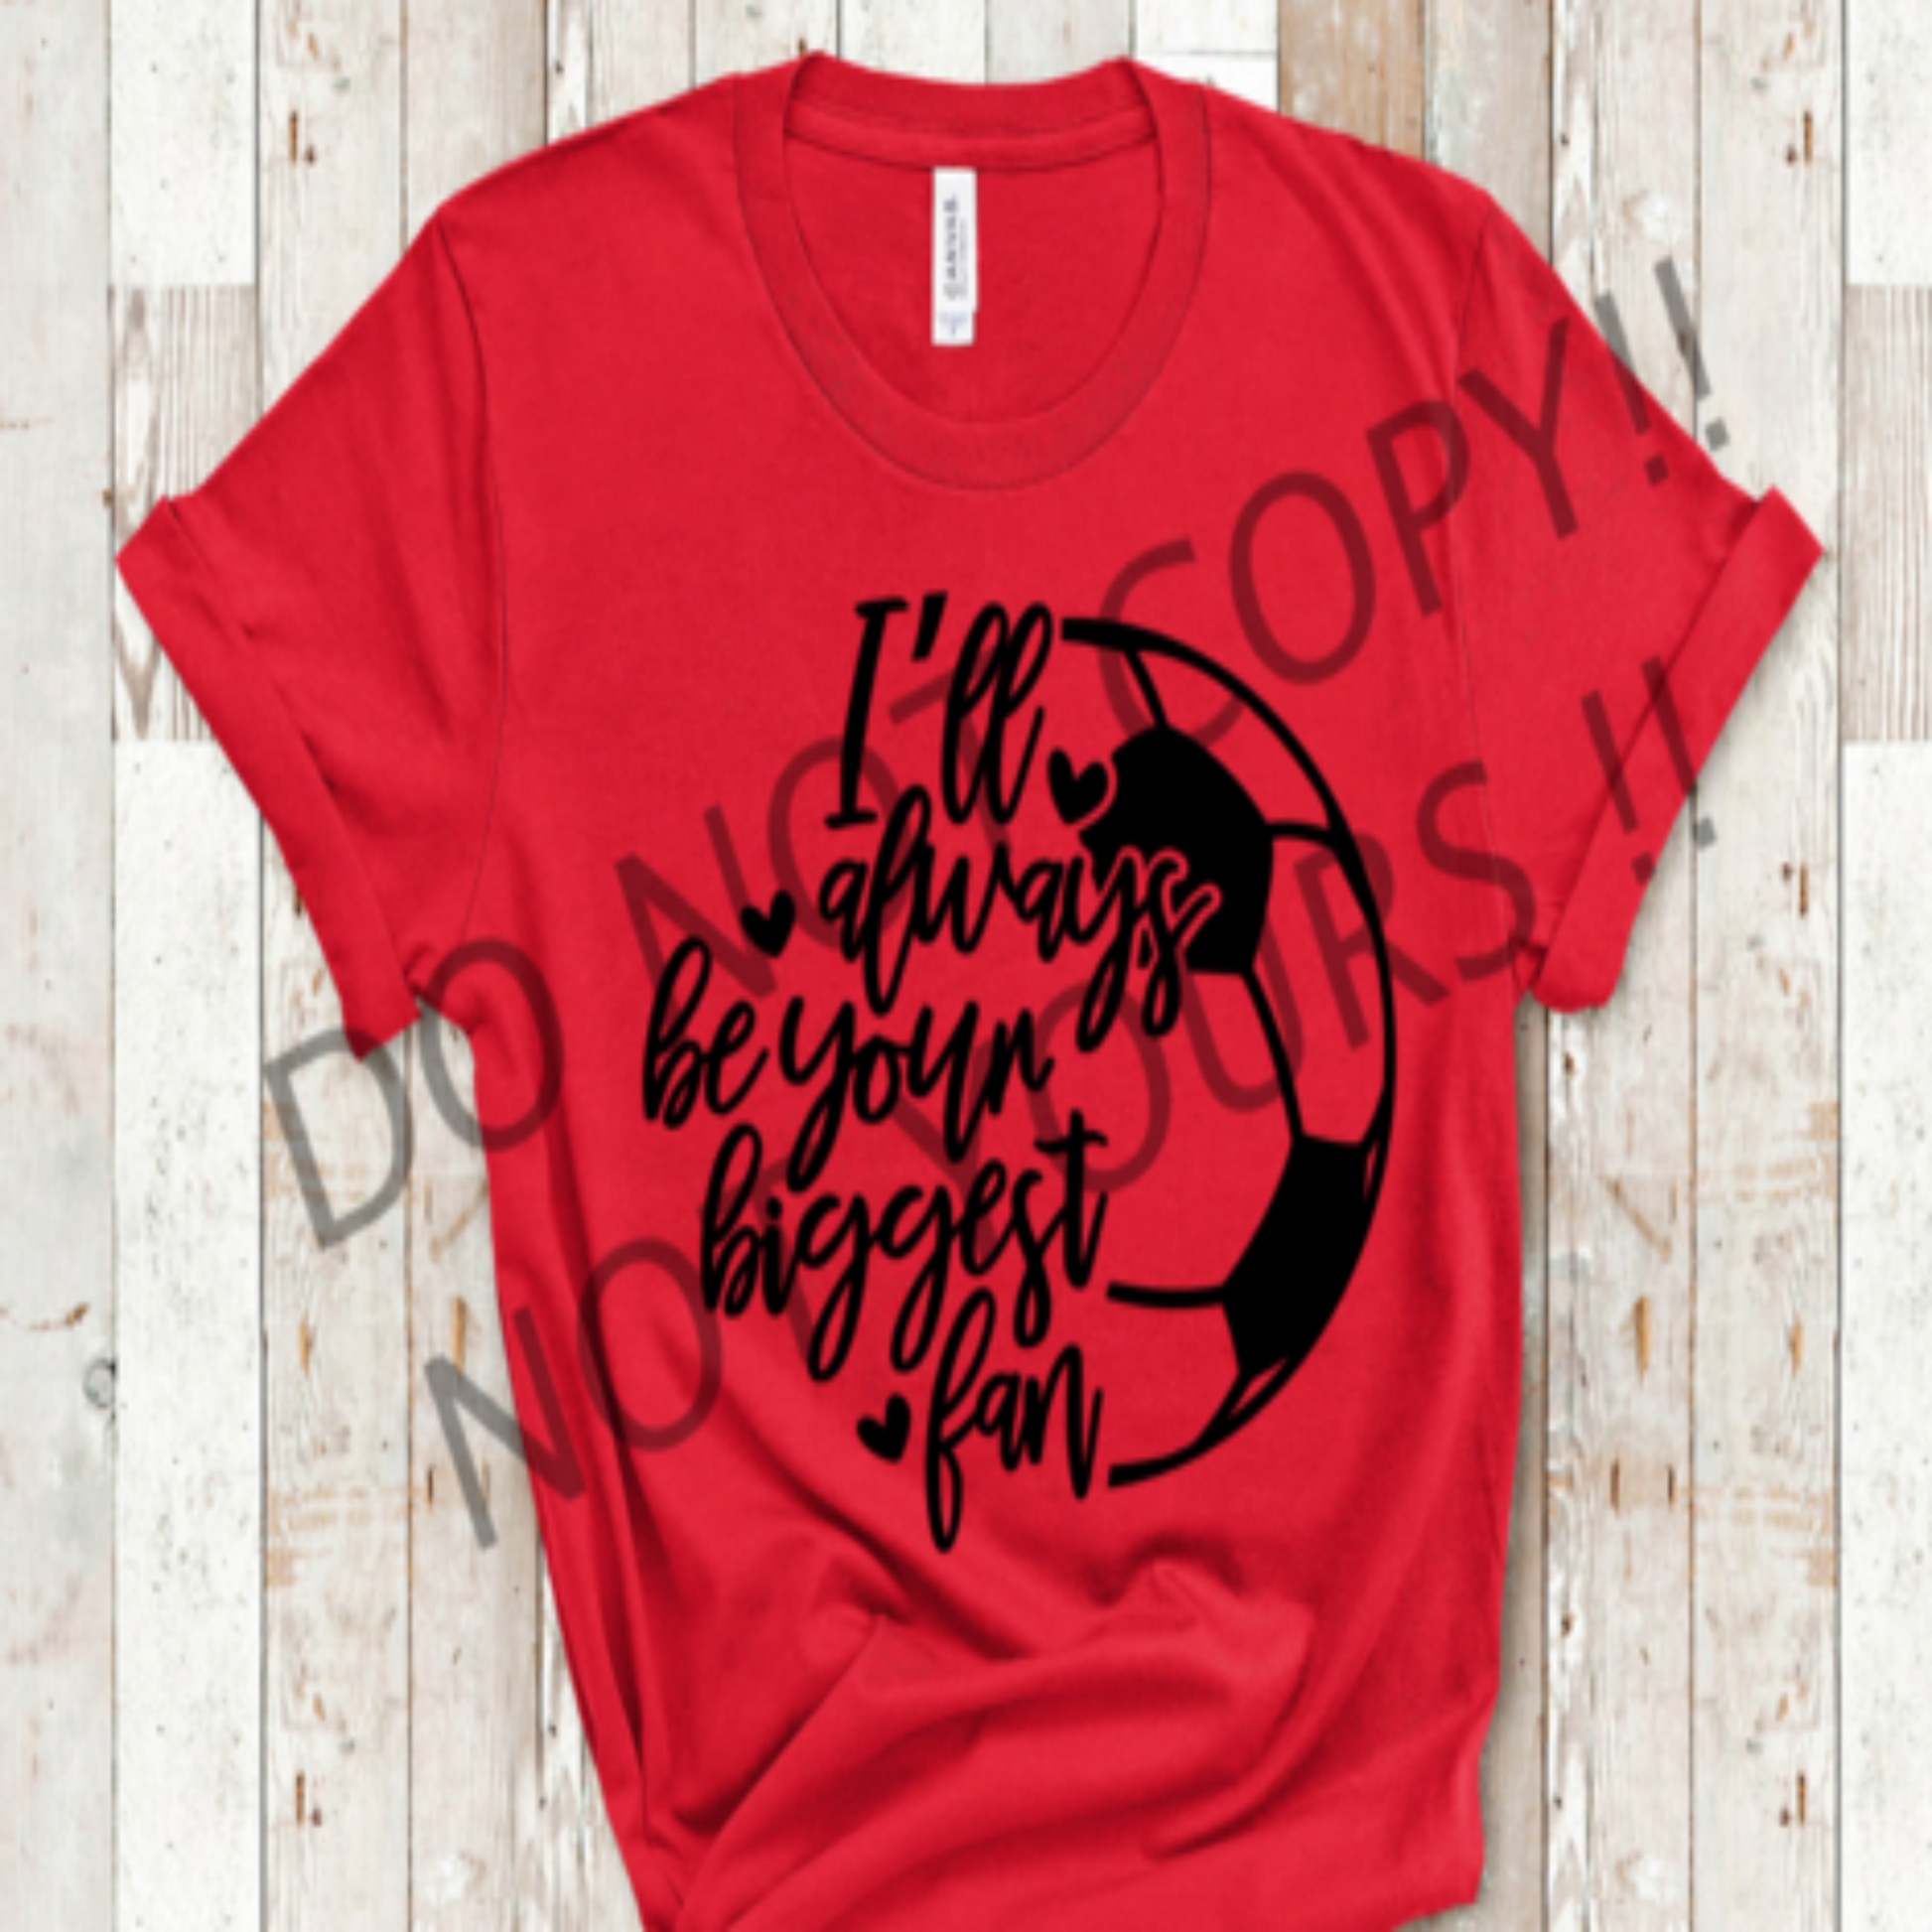 always_biggest_fan soccer specialty tee cheer wear casual tshirt game_day shirt